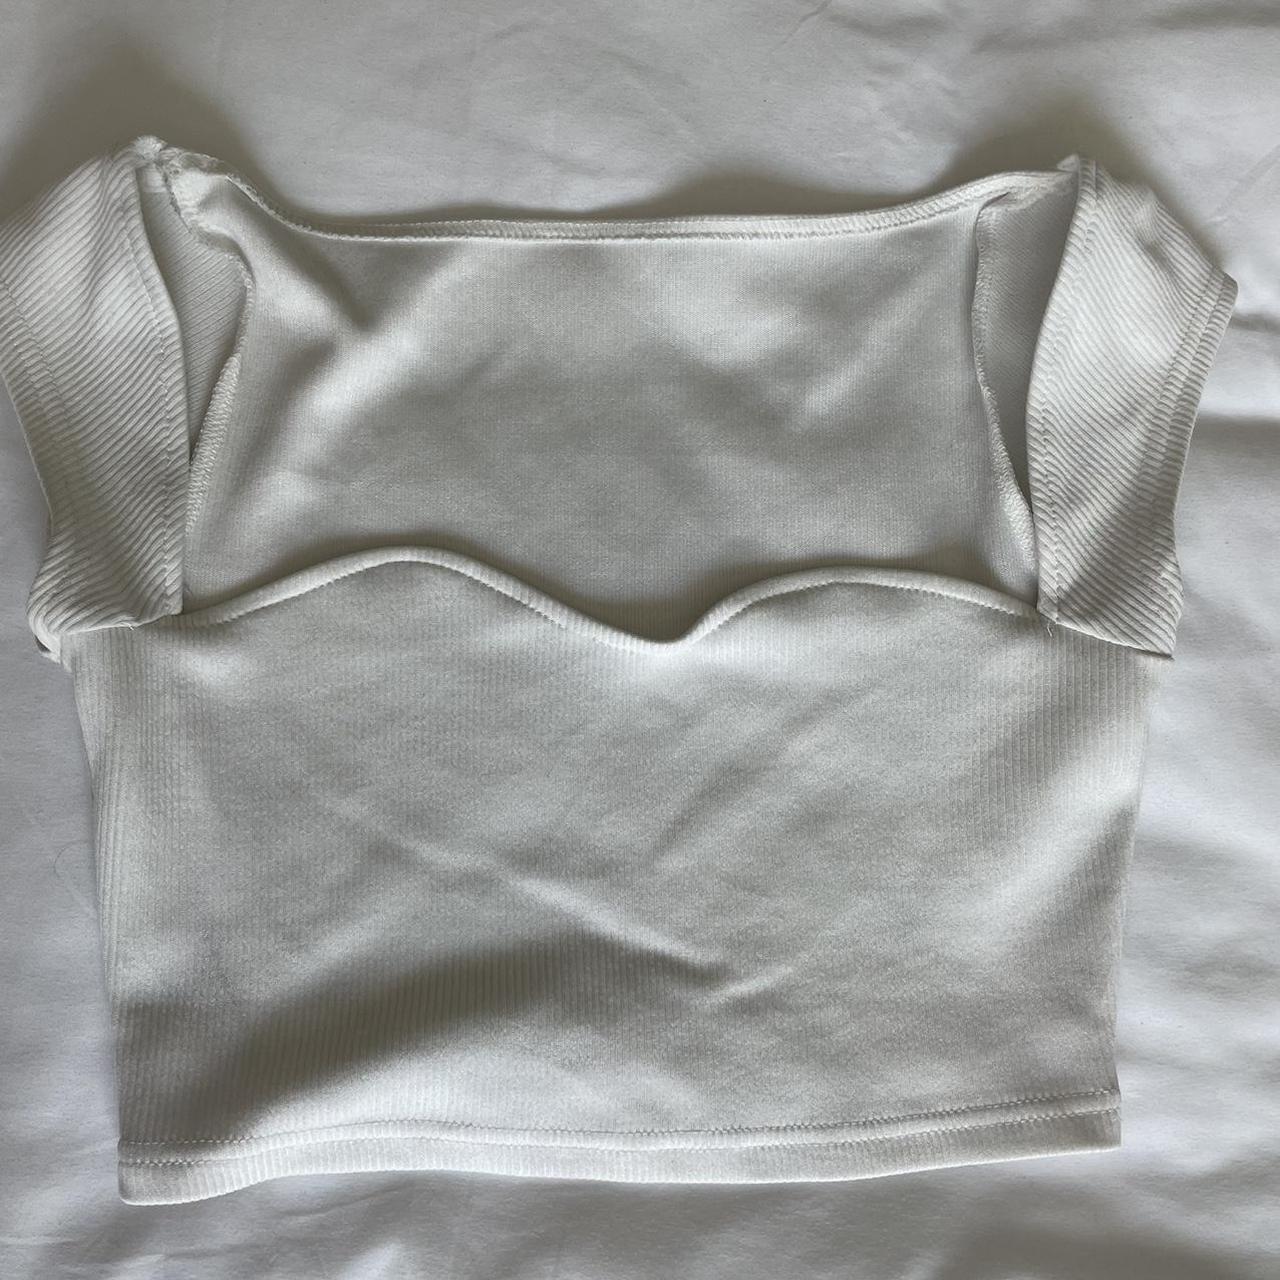 🌟 Ribbed Crop Top 🌟 - Size: Small - Worn... - Depop